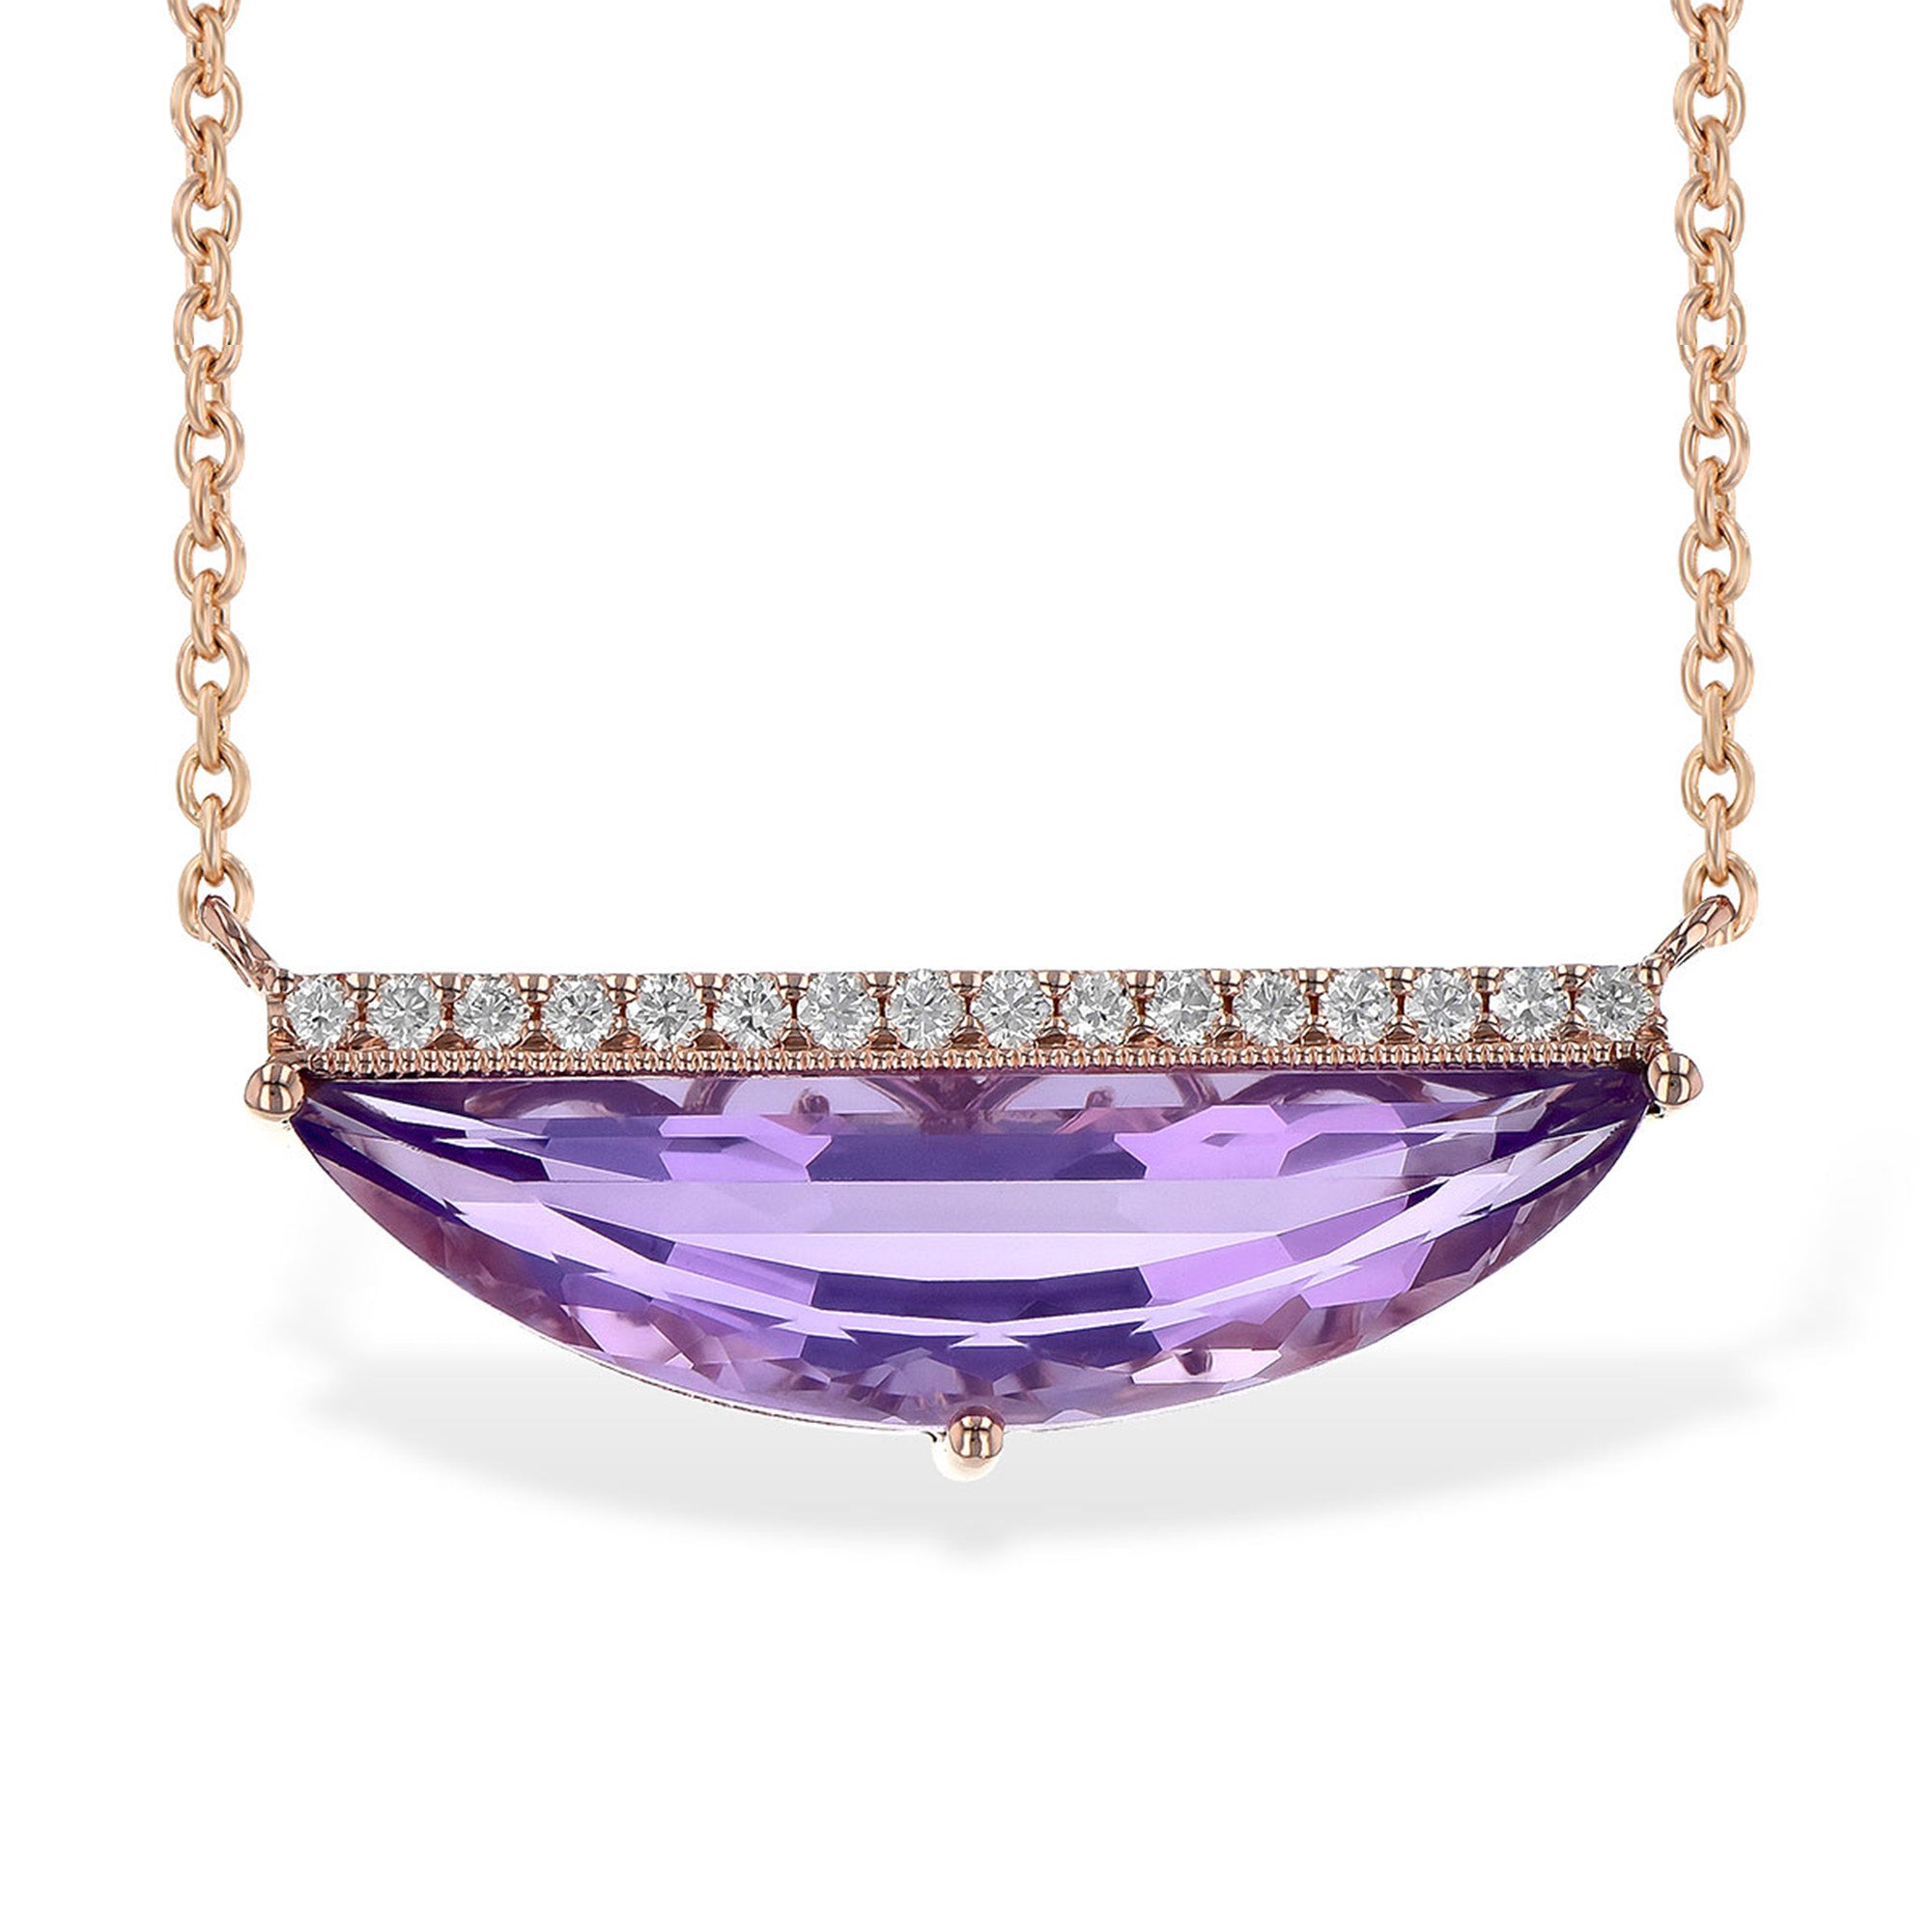 Amethyst Half Moon Necklace - Talisman Collection Fine Jewelers